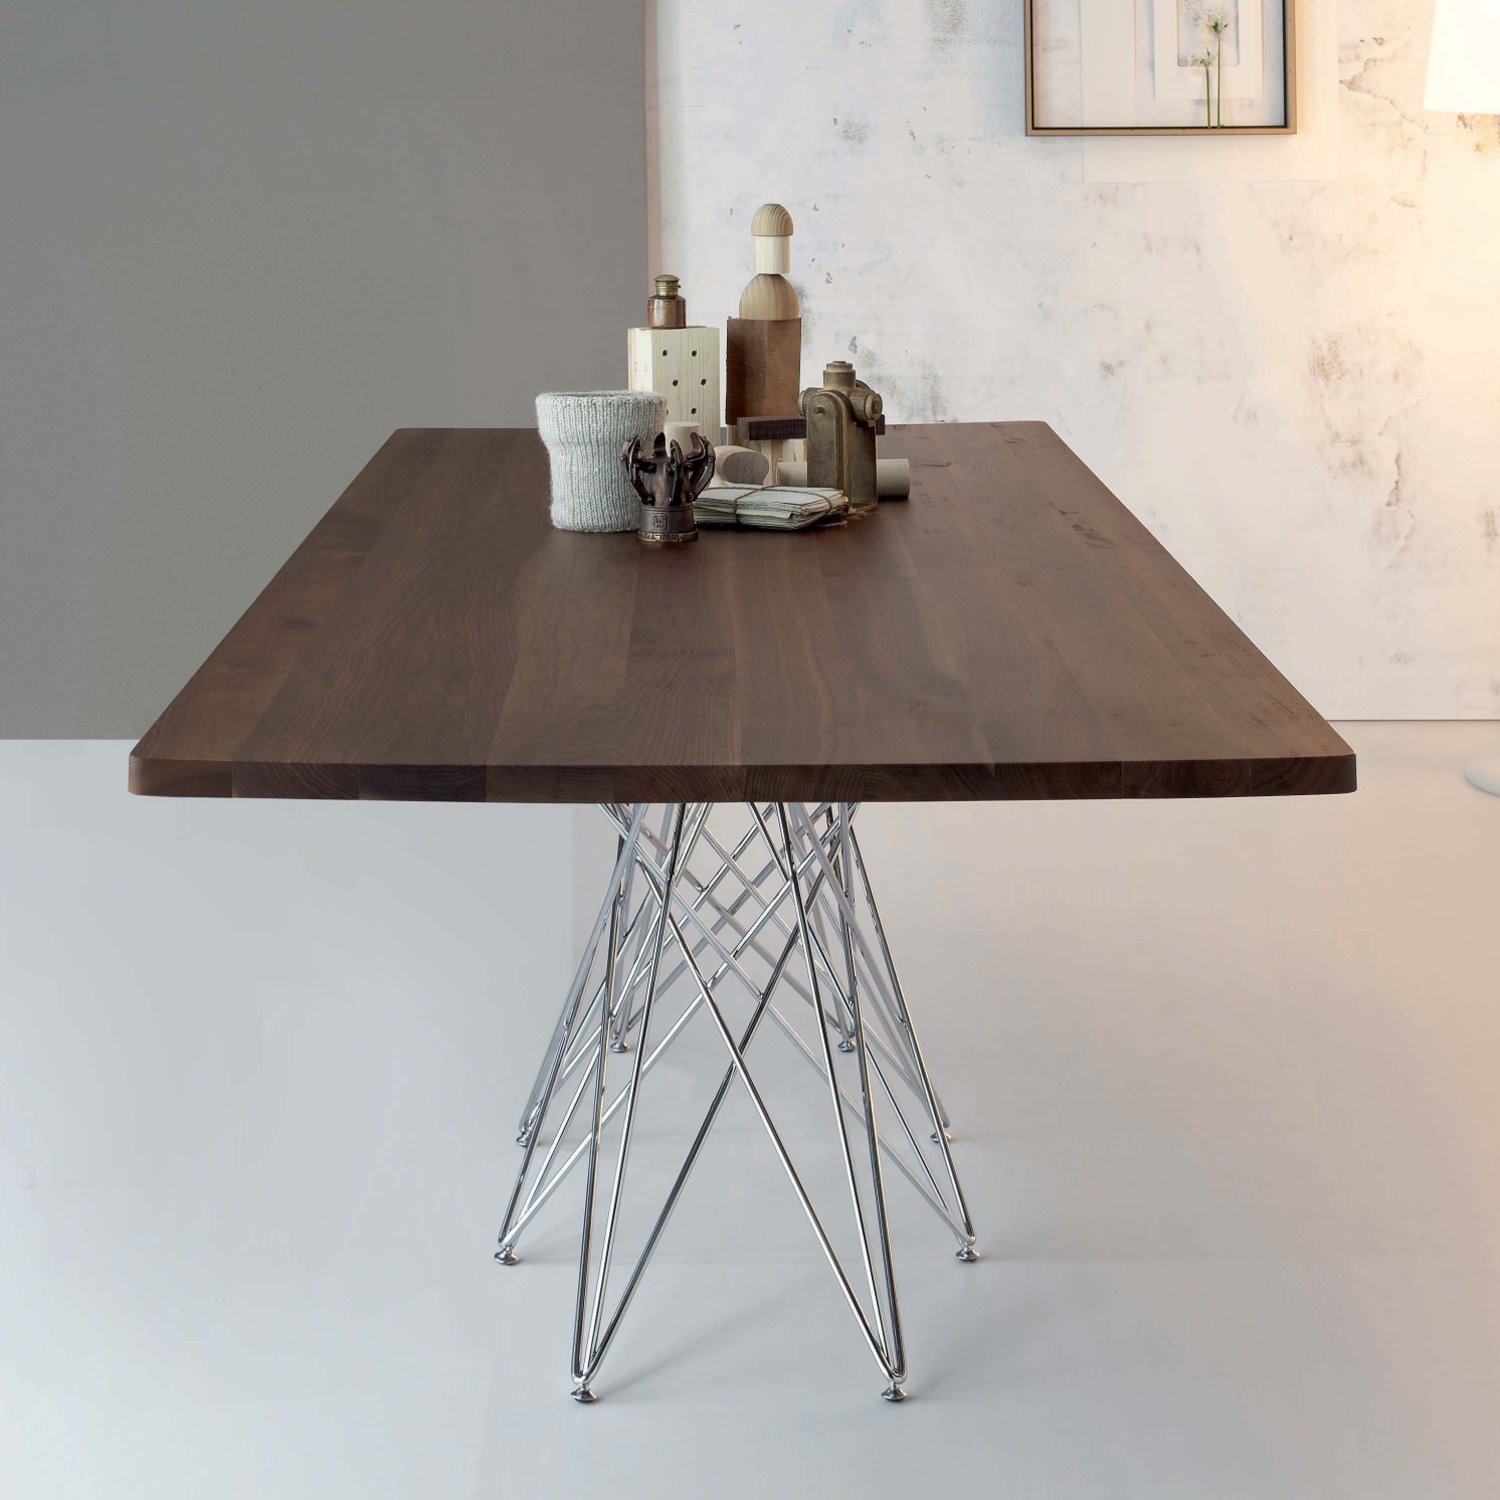 Octa table with central woven base - DIOTTI.COM